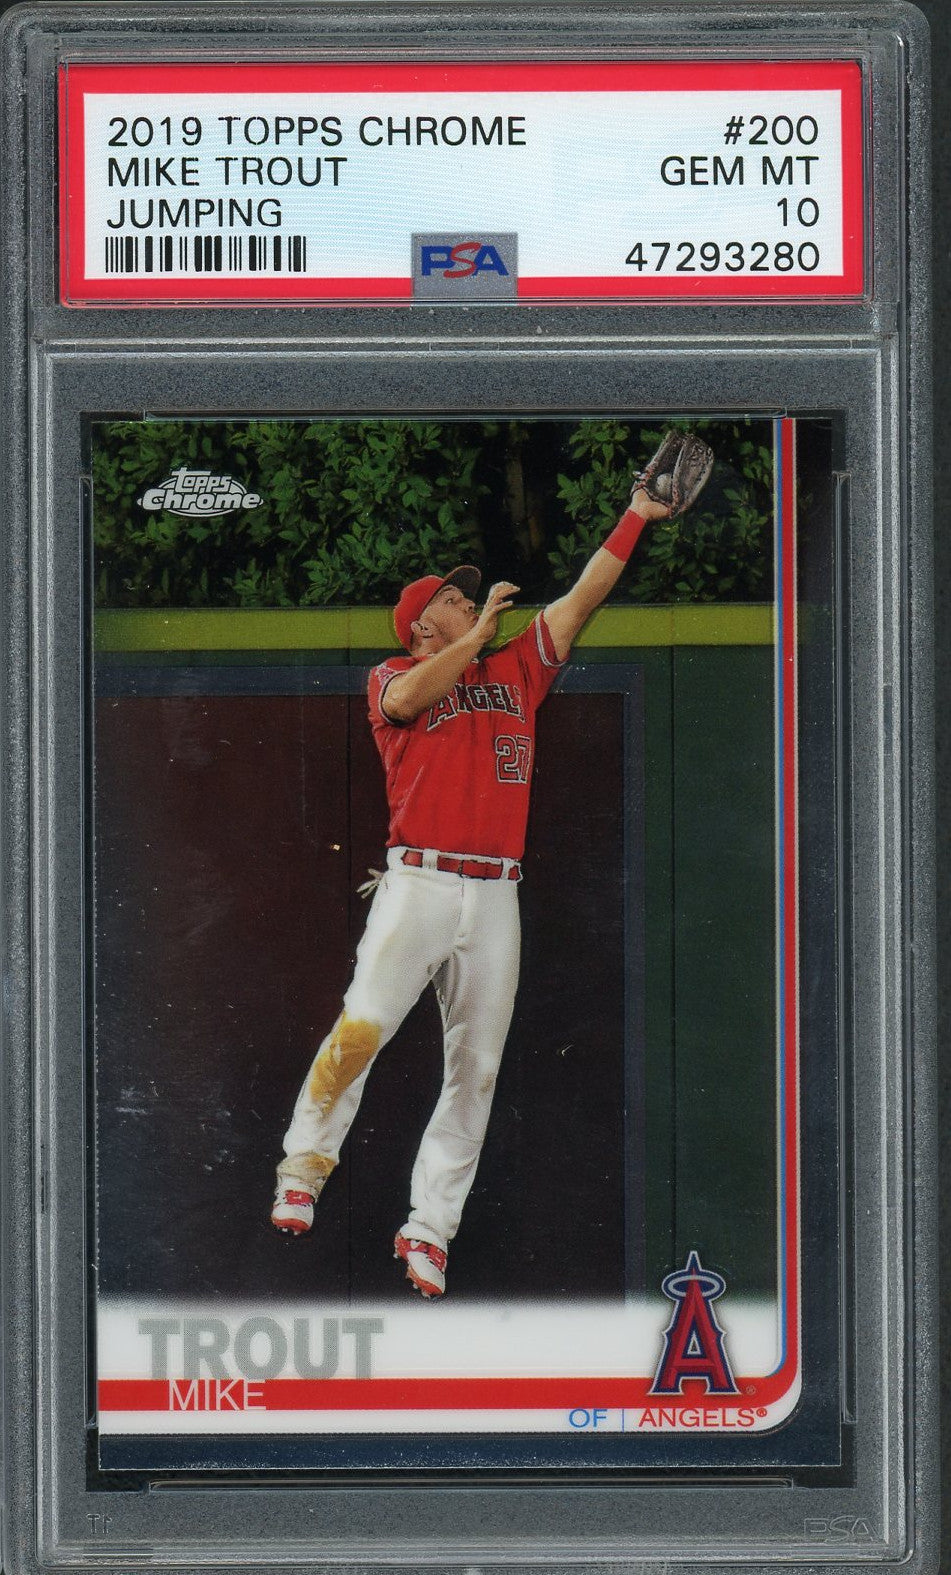 Mike Trout 2017 TOPPS GYPSY QUEEN THROWBACK VARIATION SP #200 ANGELS!